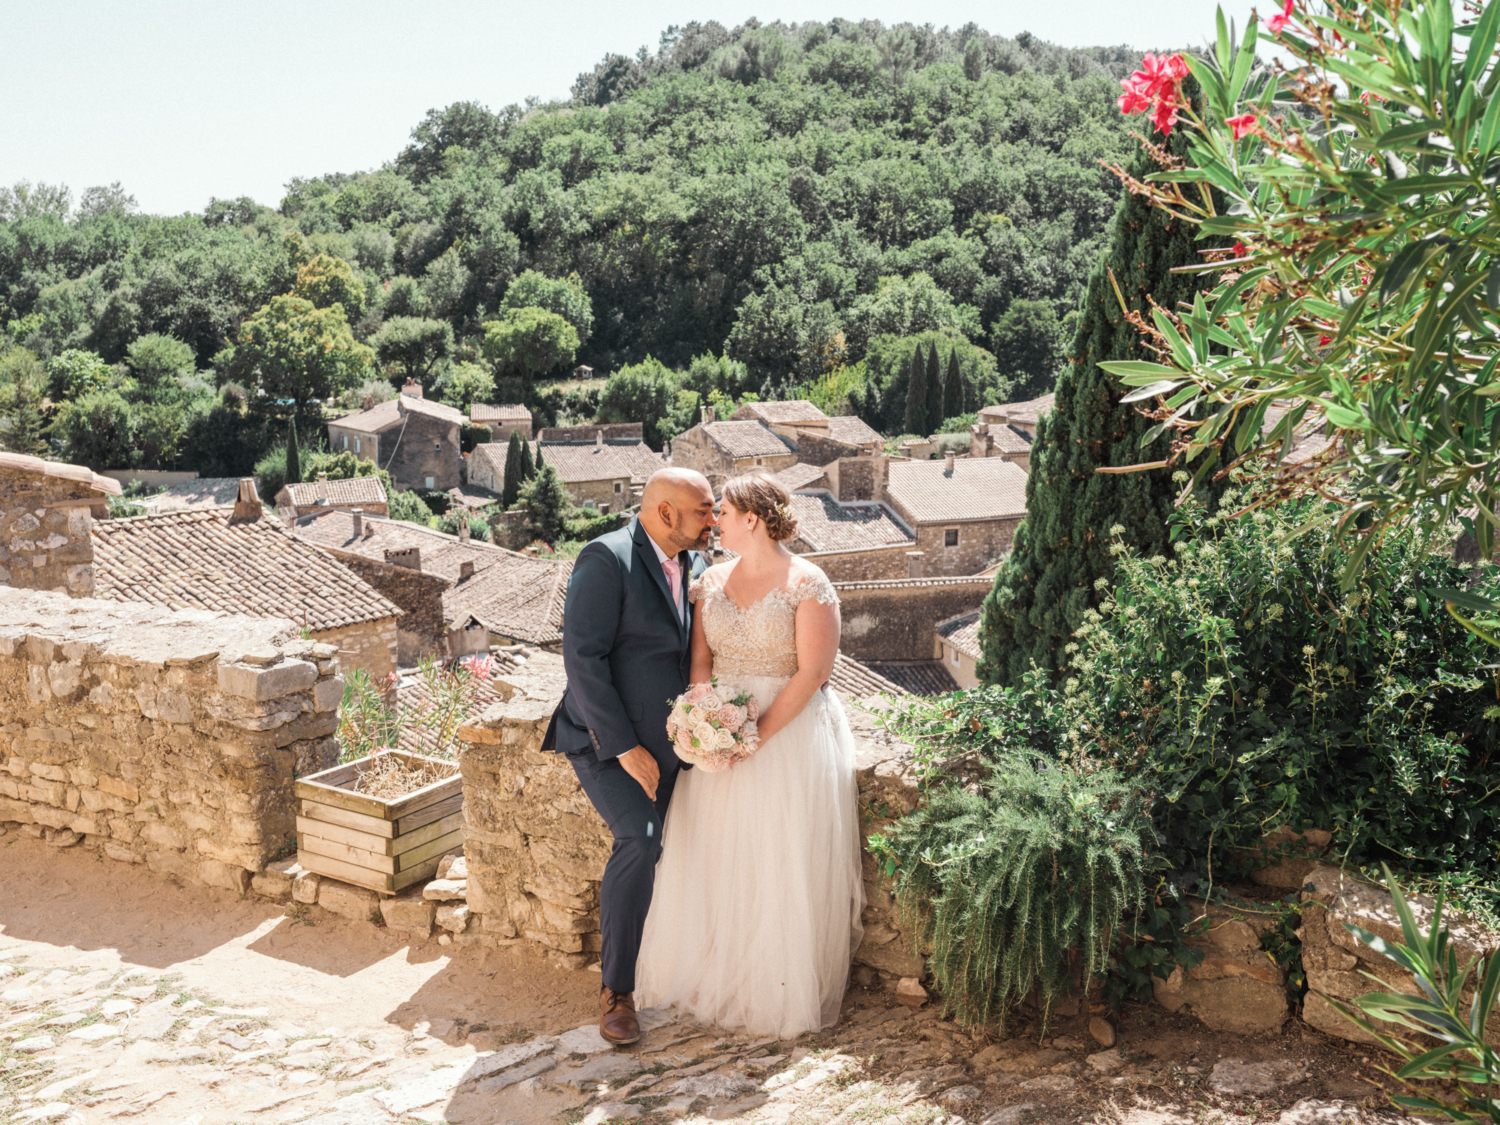 newlyweds gaze at each other in saint montan